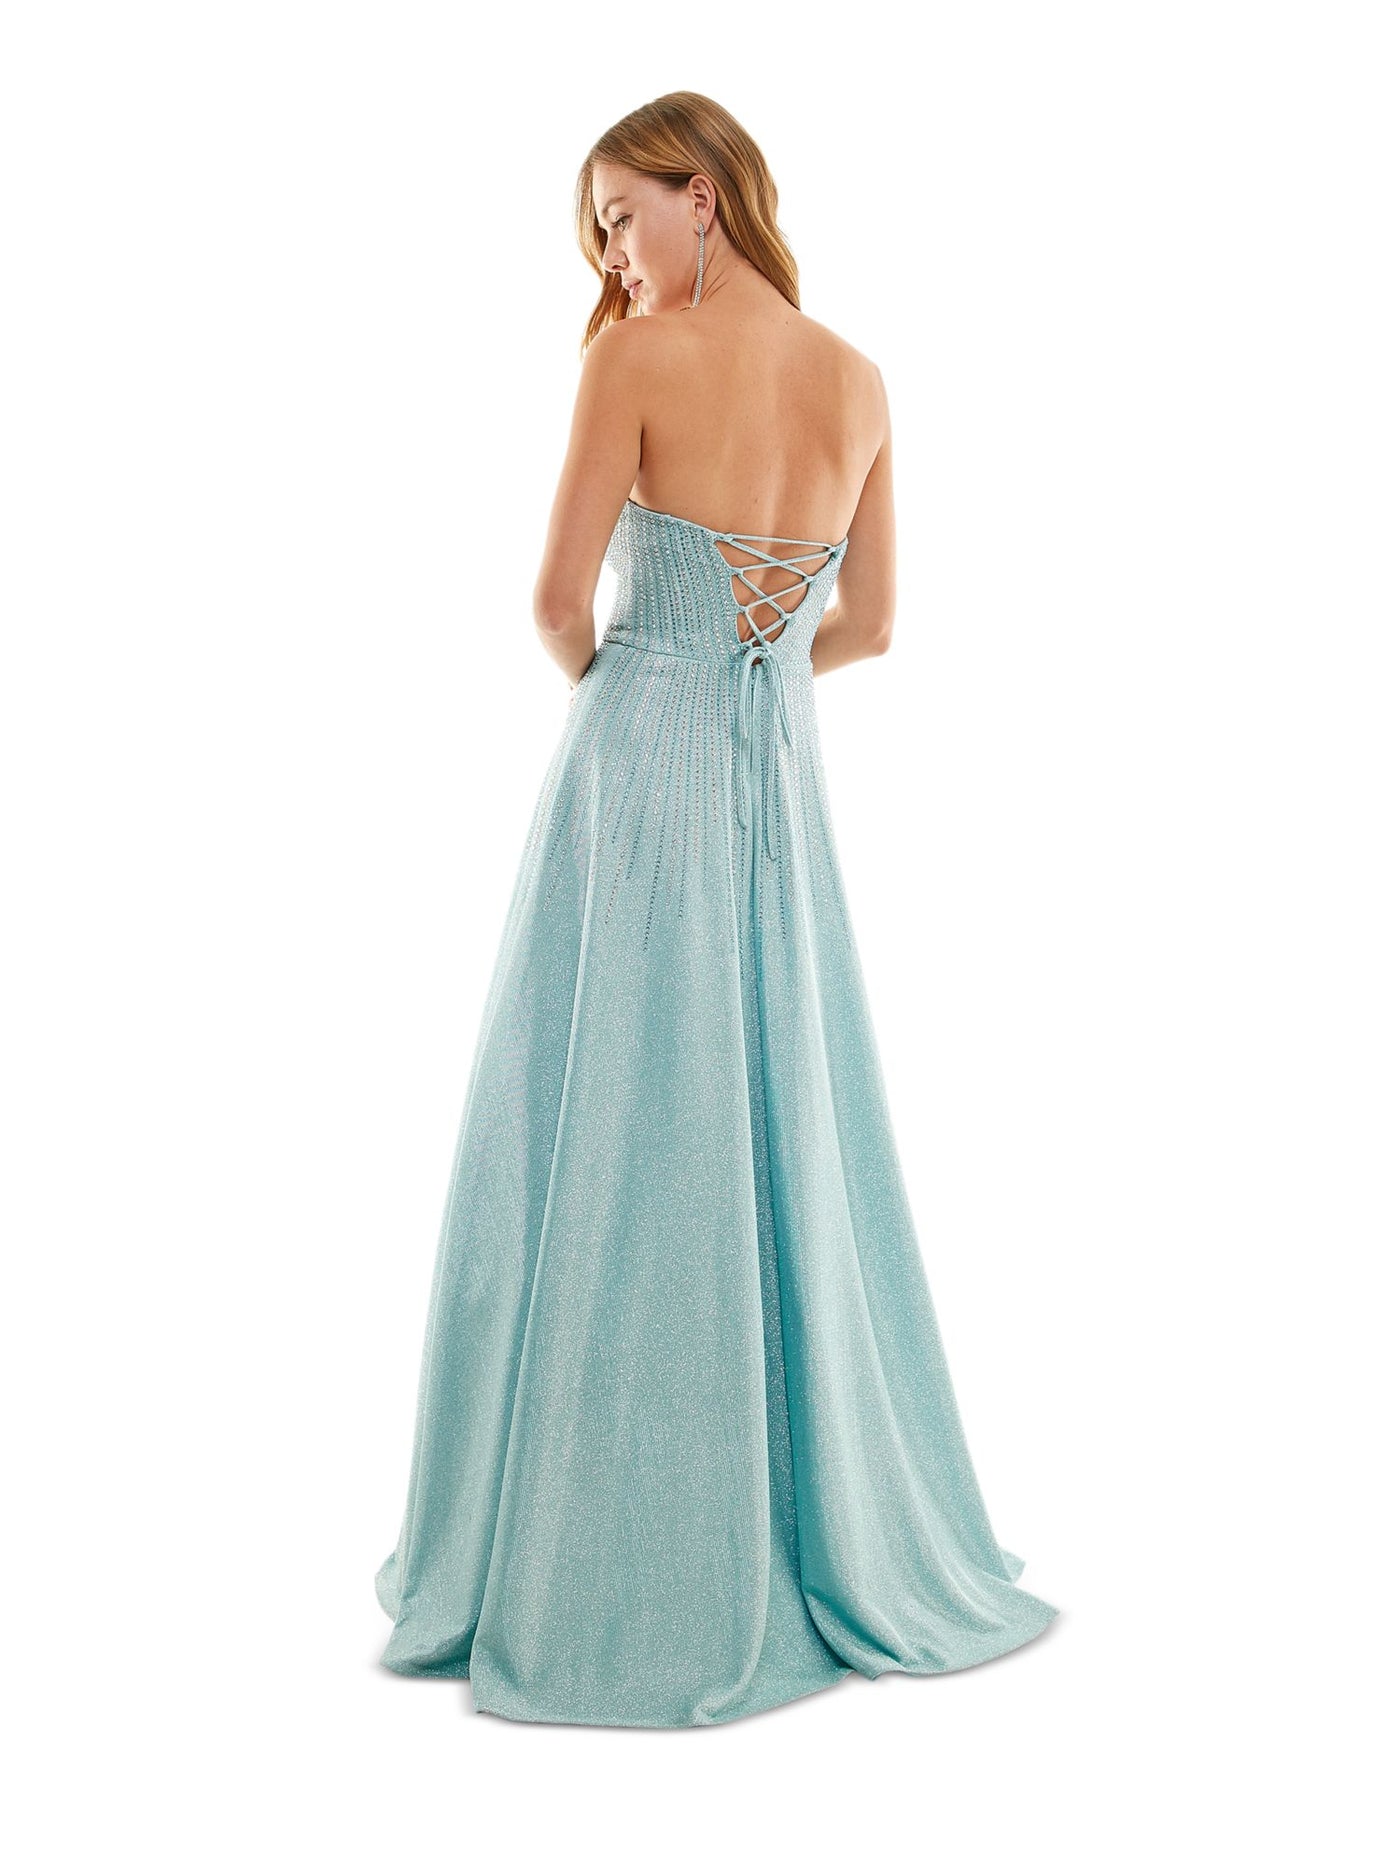 SAY YES TO THE PROM Womens Light Blue Embellished Zippered Padded Lined Tulle Lace Up Back Sleeveless Strapless Full-Length Formal Gown Dress Juniors 5